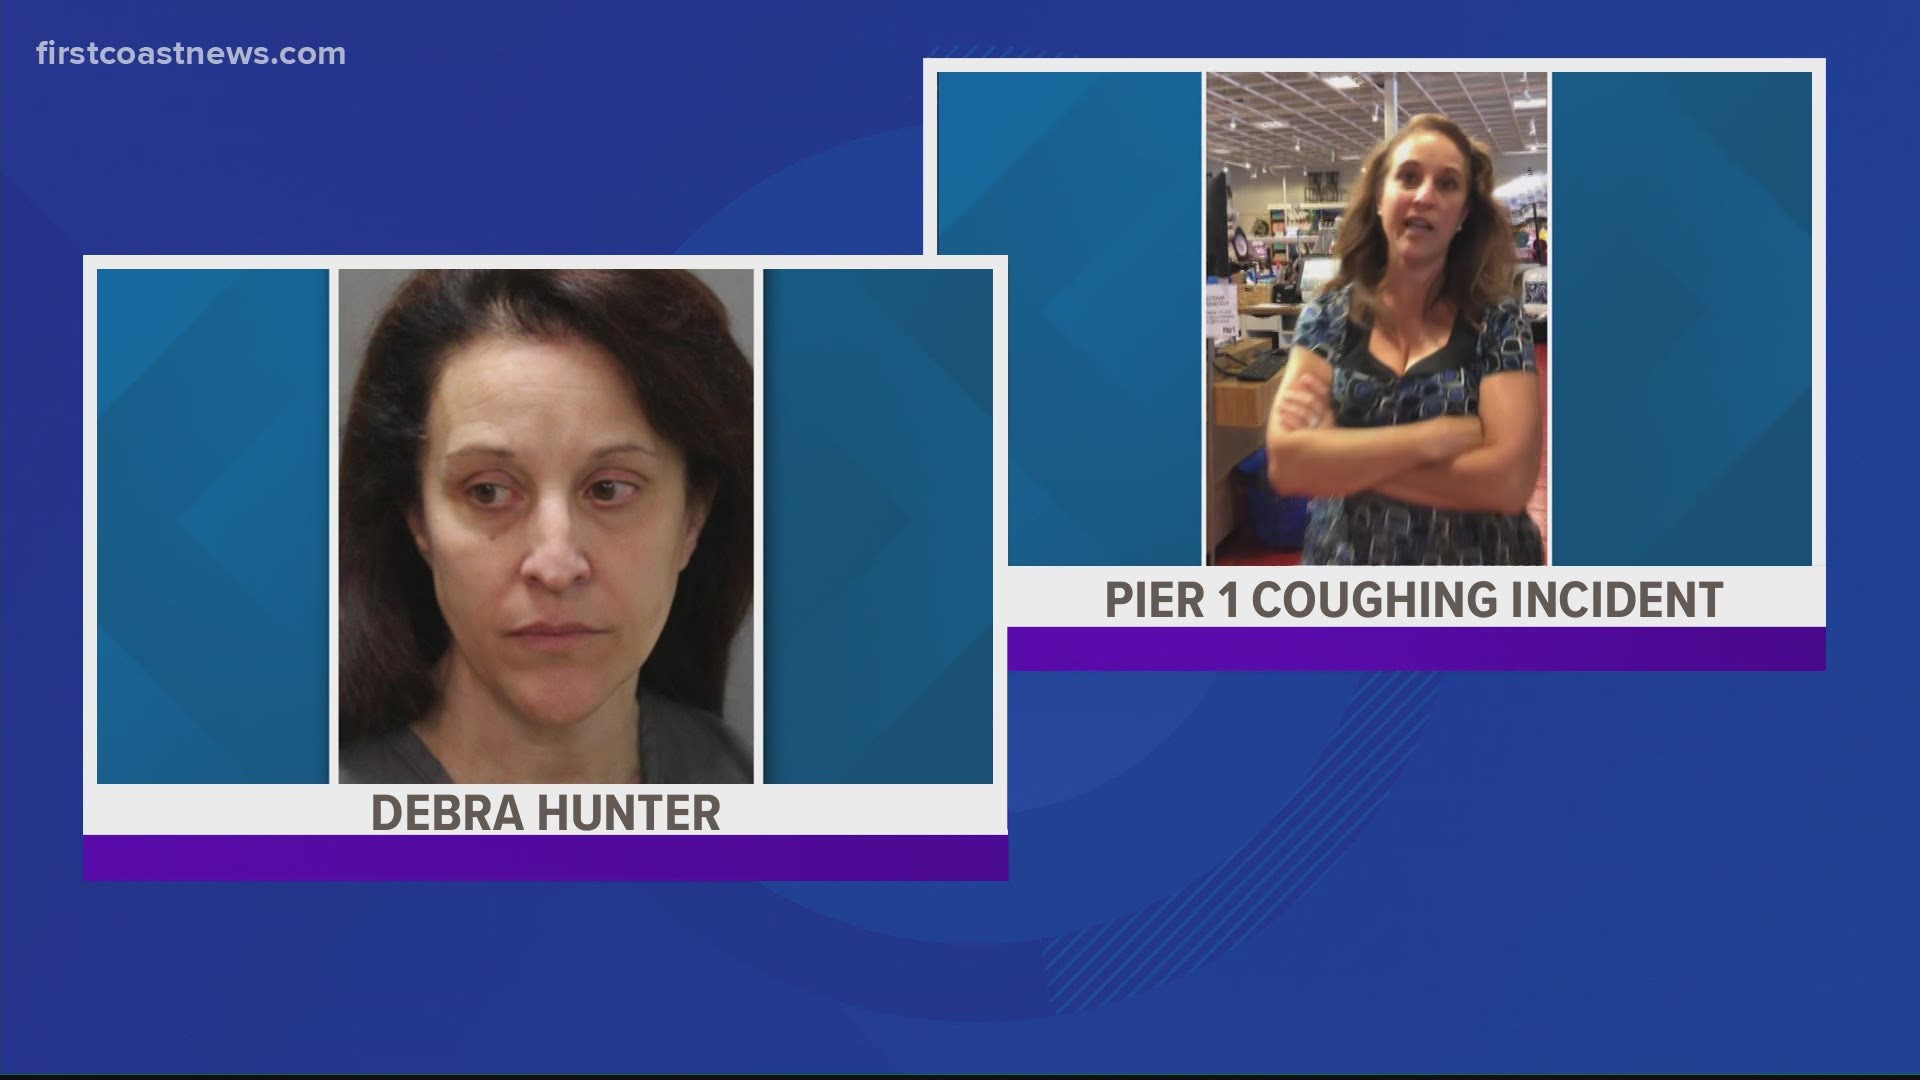 Debra Hunter was arrested and charged with misdemeanor assault in June of 2020 after the victim recorded Hunter deliberately coughing on her.